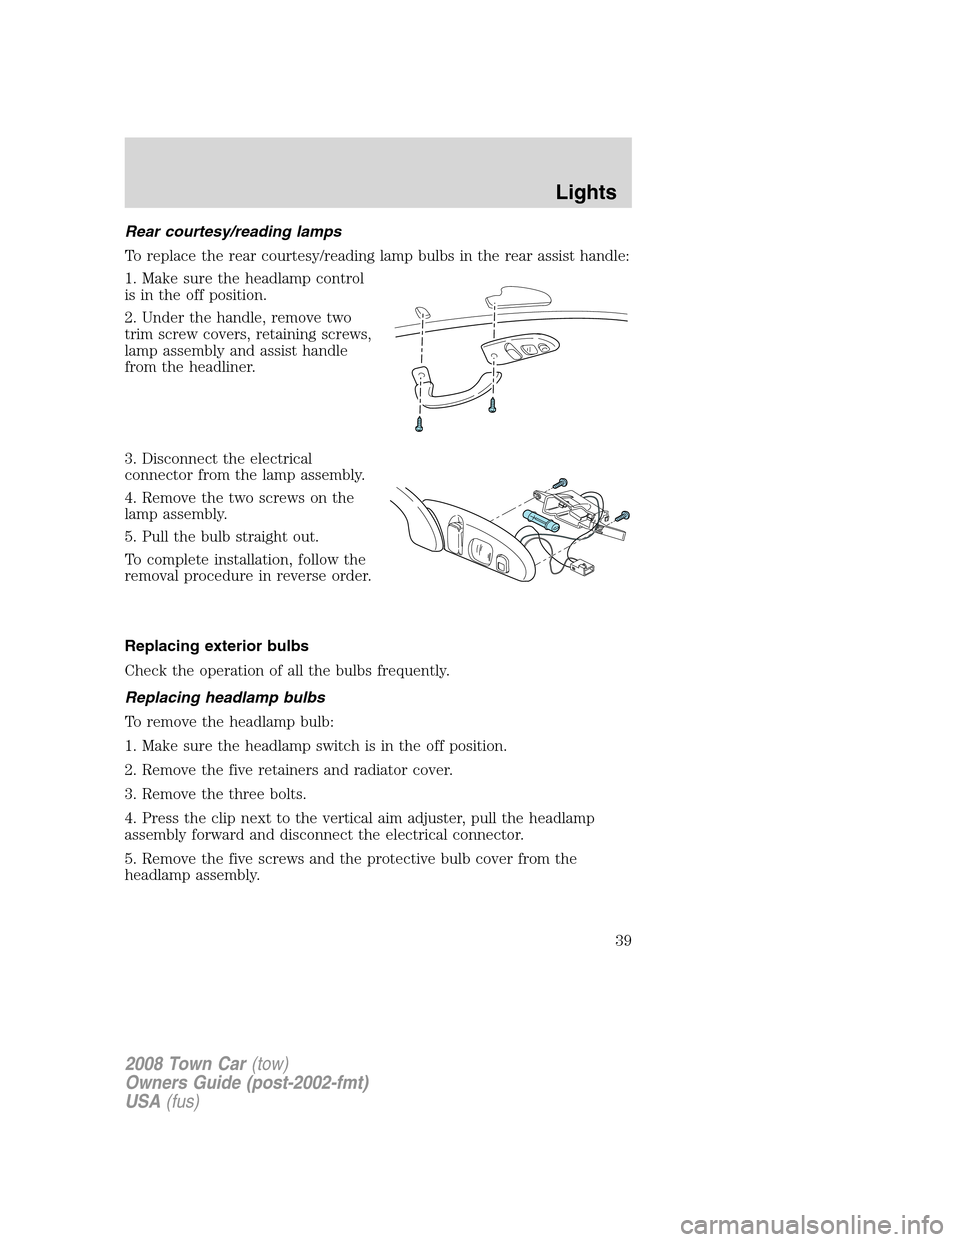 LINCOLN TOWN CAR 2008  Owners Manual Rear courtesy/reading lamps
To replace the rear courtesy/reading lamp bulbs in the rear assist handle:
1. Make sure the headlamp control
is in the off position.
2. Under the handle, remove two
trim sc